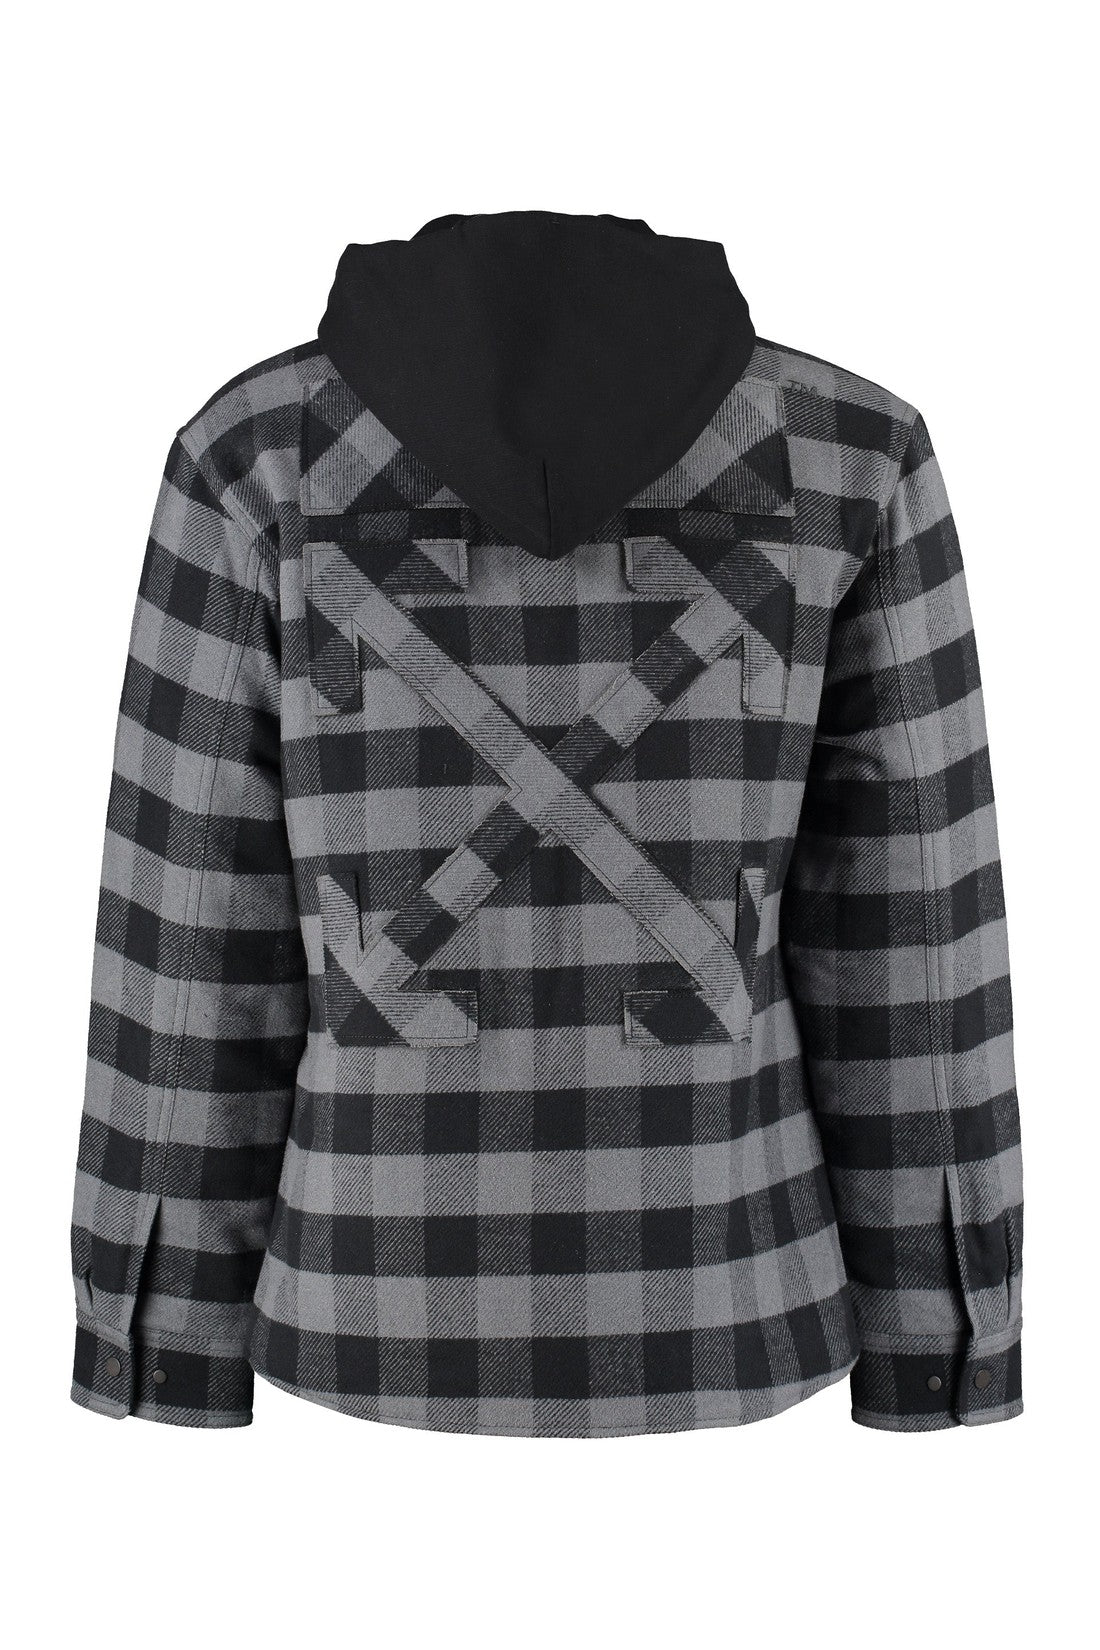 Off-White-OUTLET-SALE-Hooded checked overshirt-ARCHIVIST